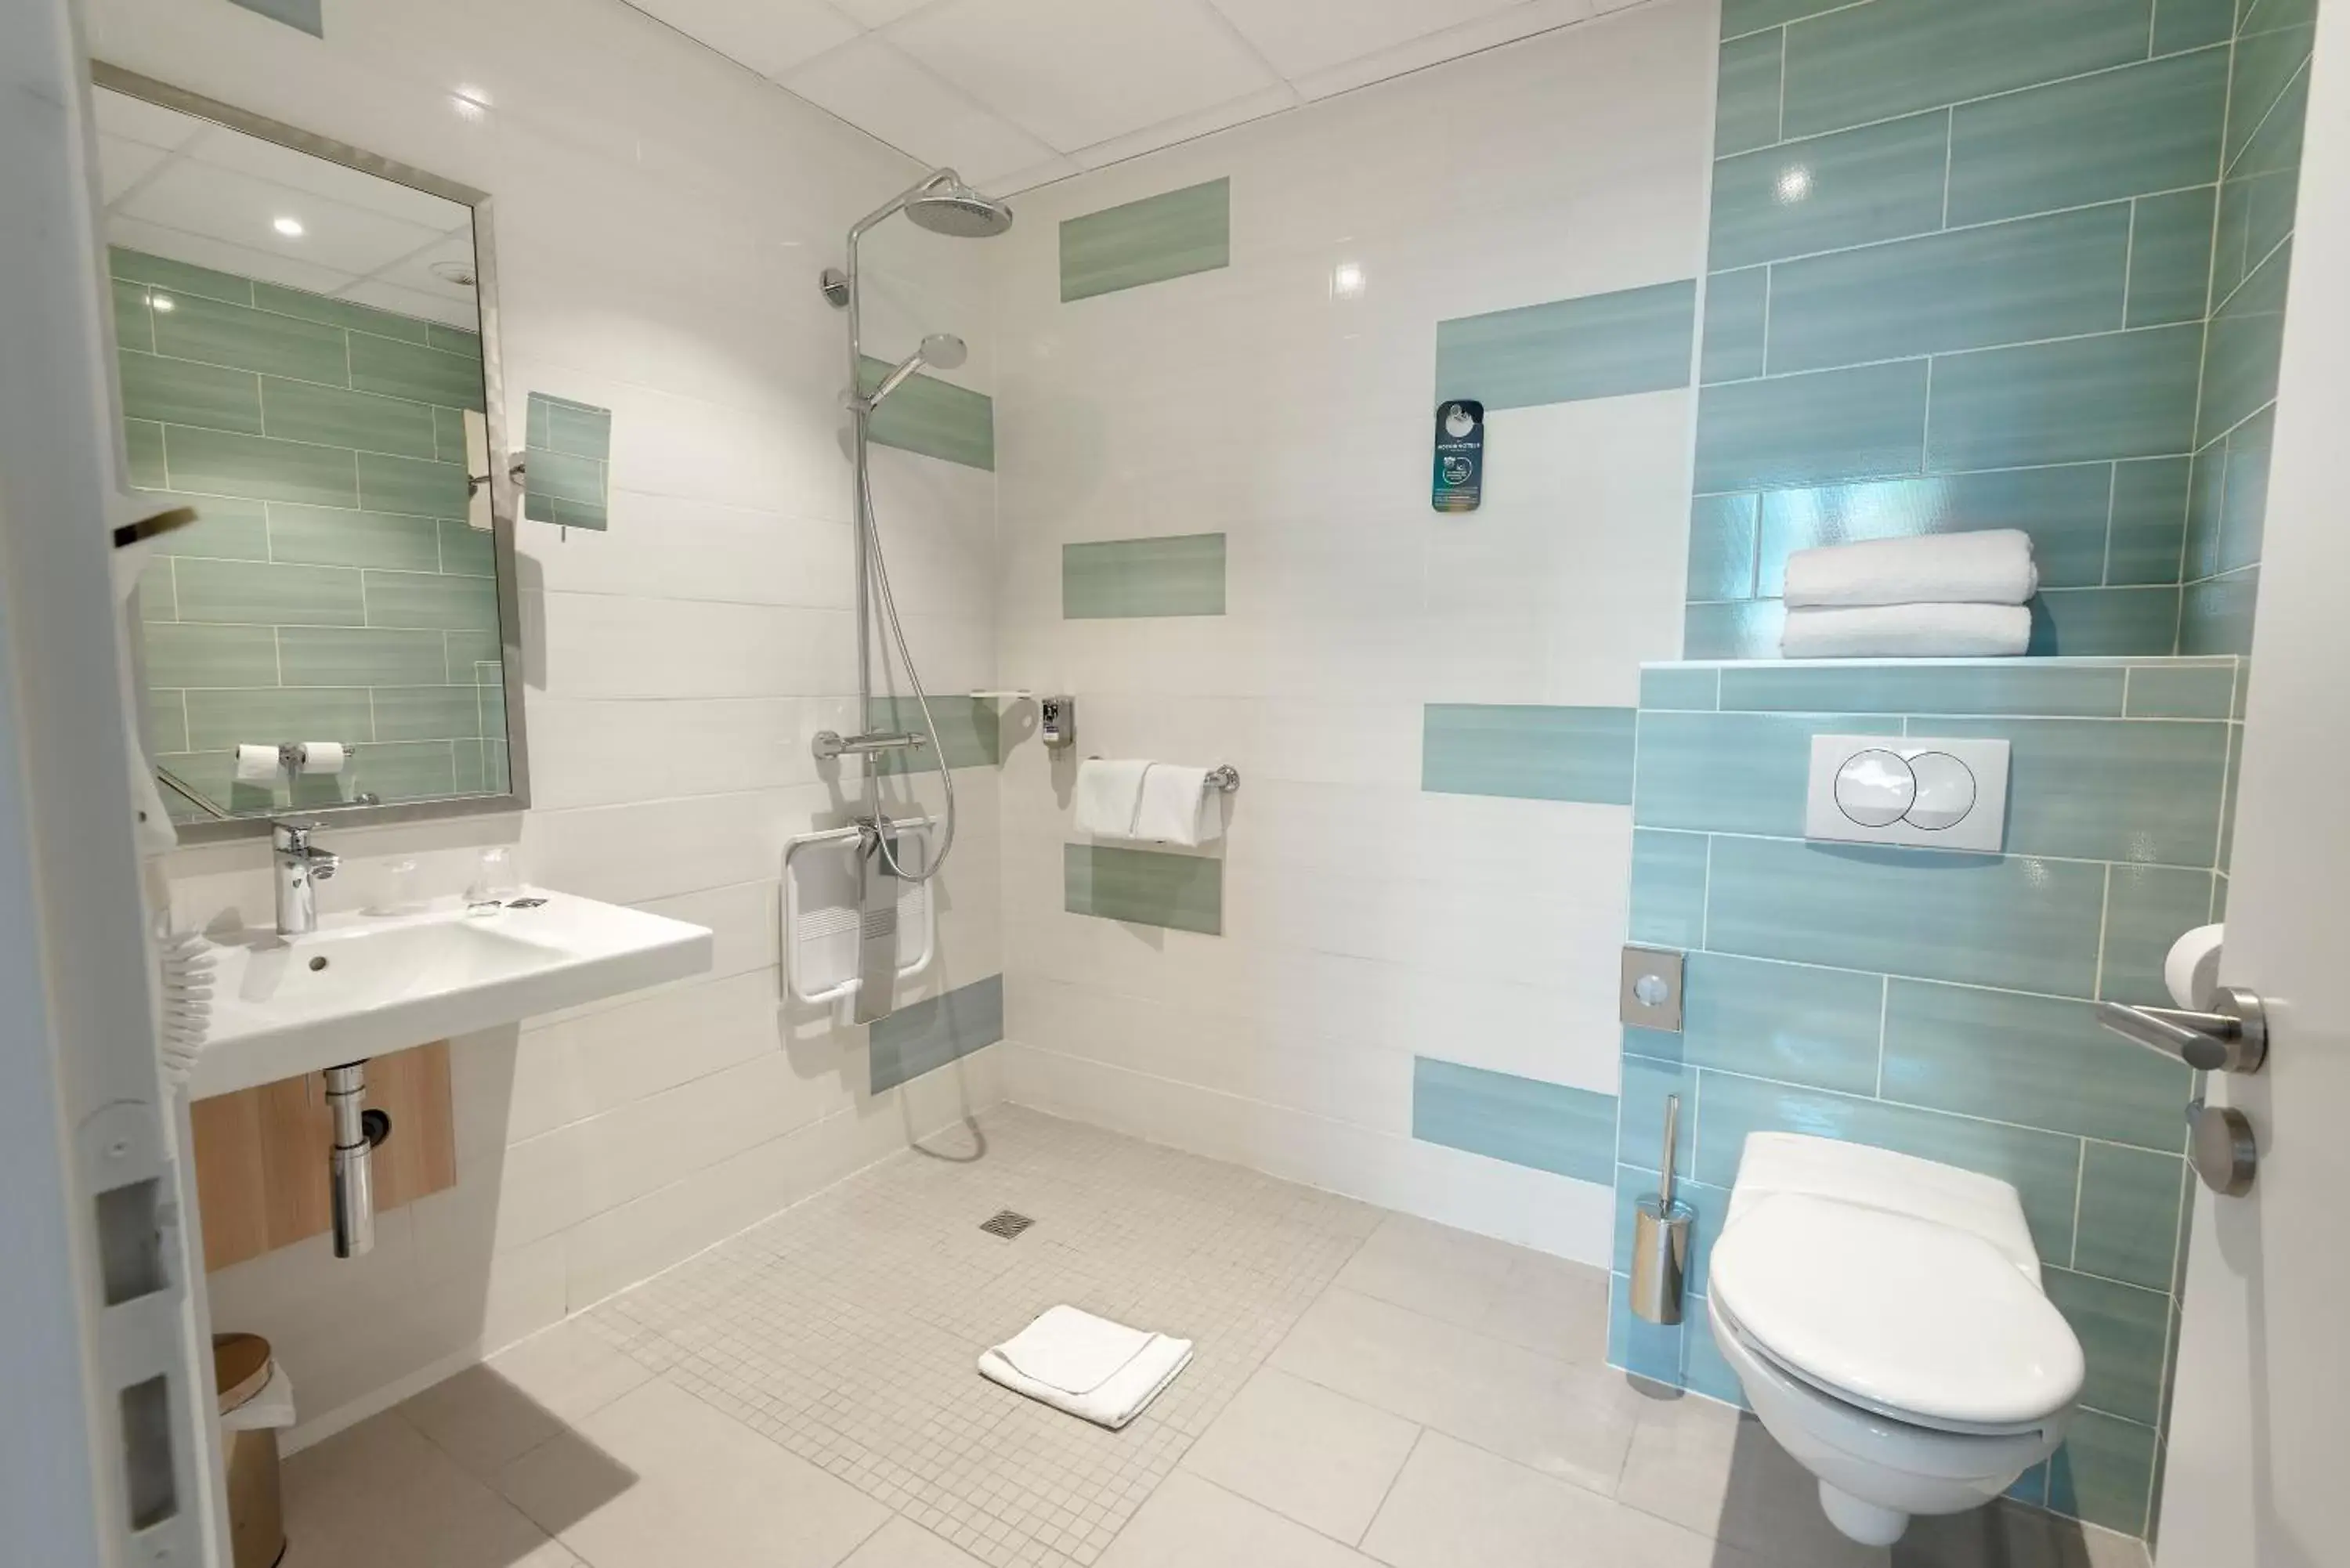 Facility for disabled guests, Bathroom in Hôtel Mercure Thionville Centre Porte du Luxembourg